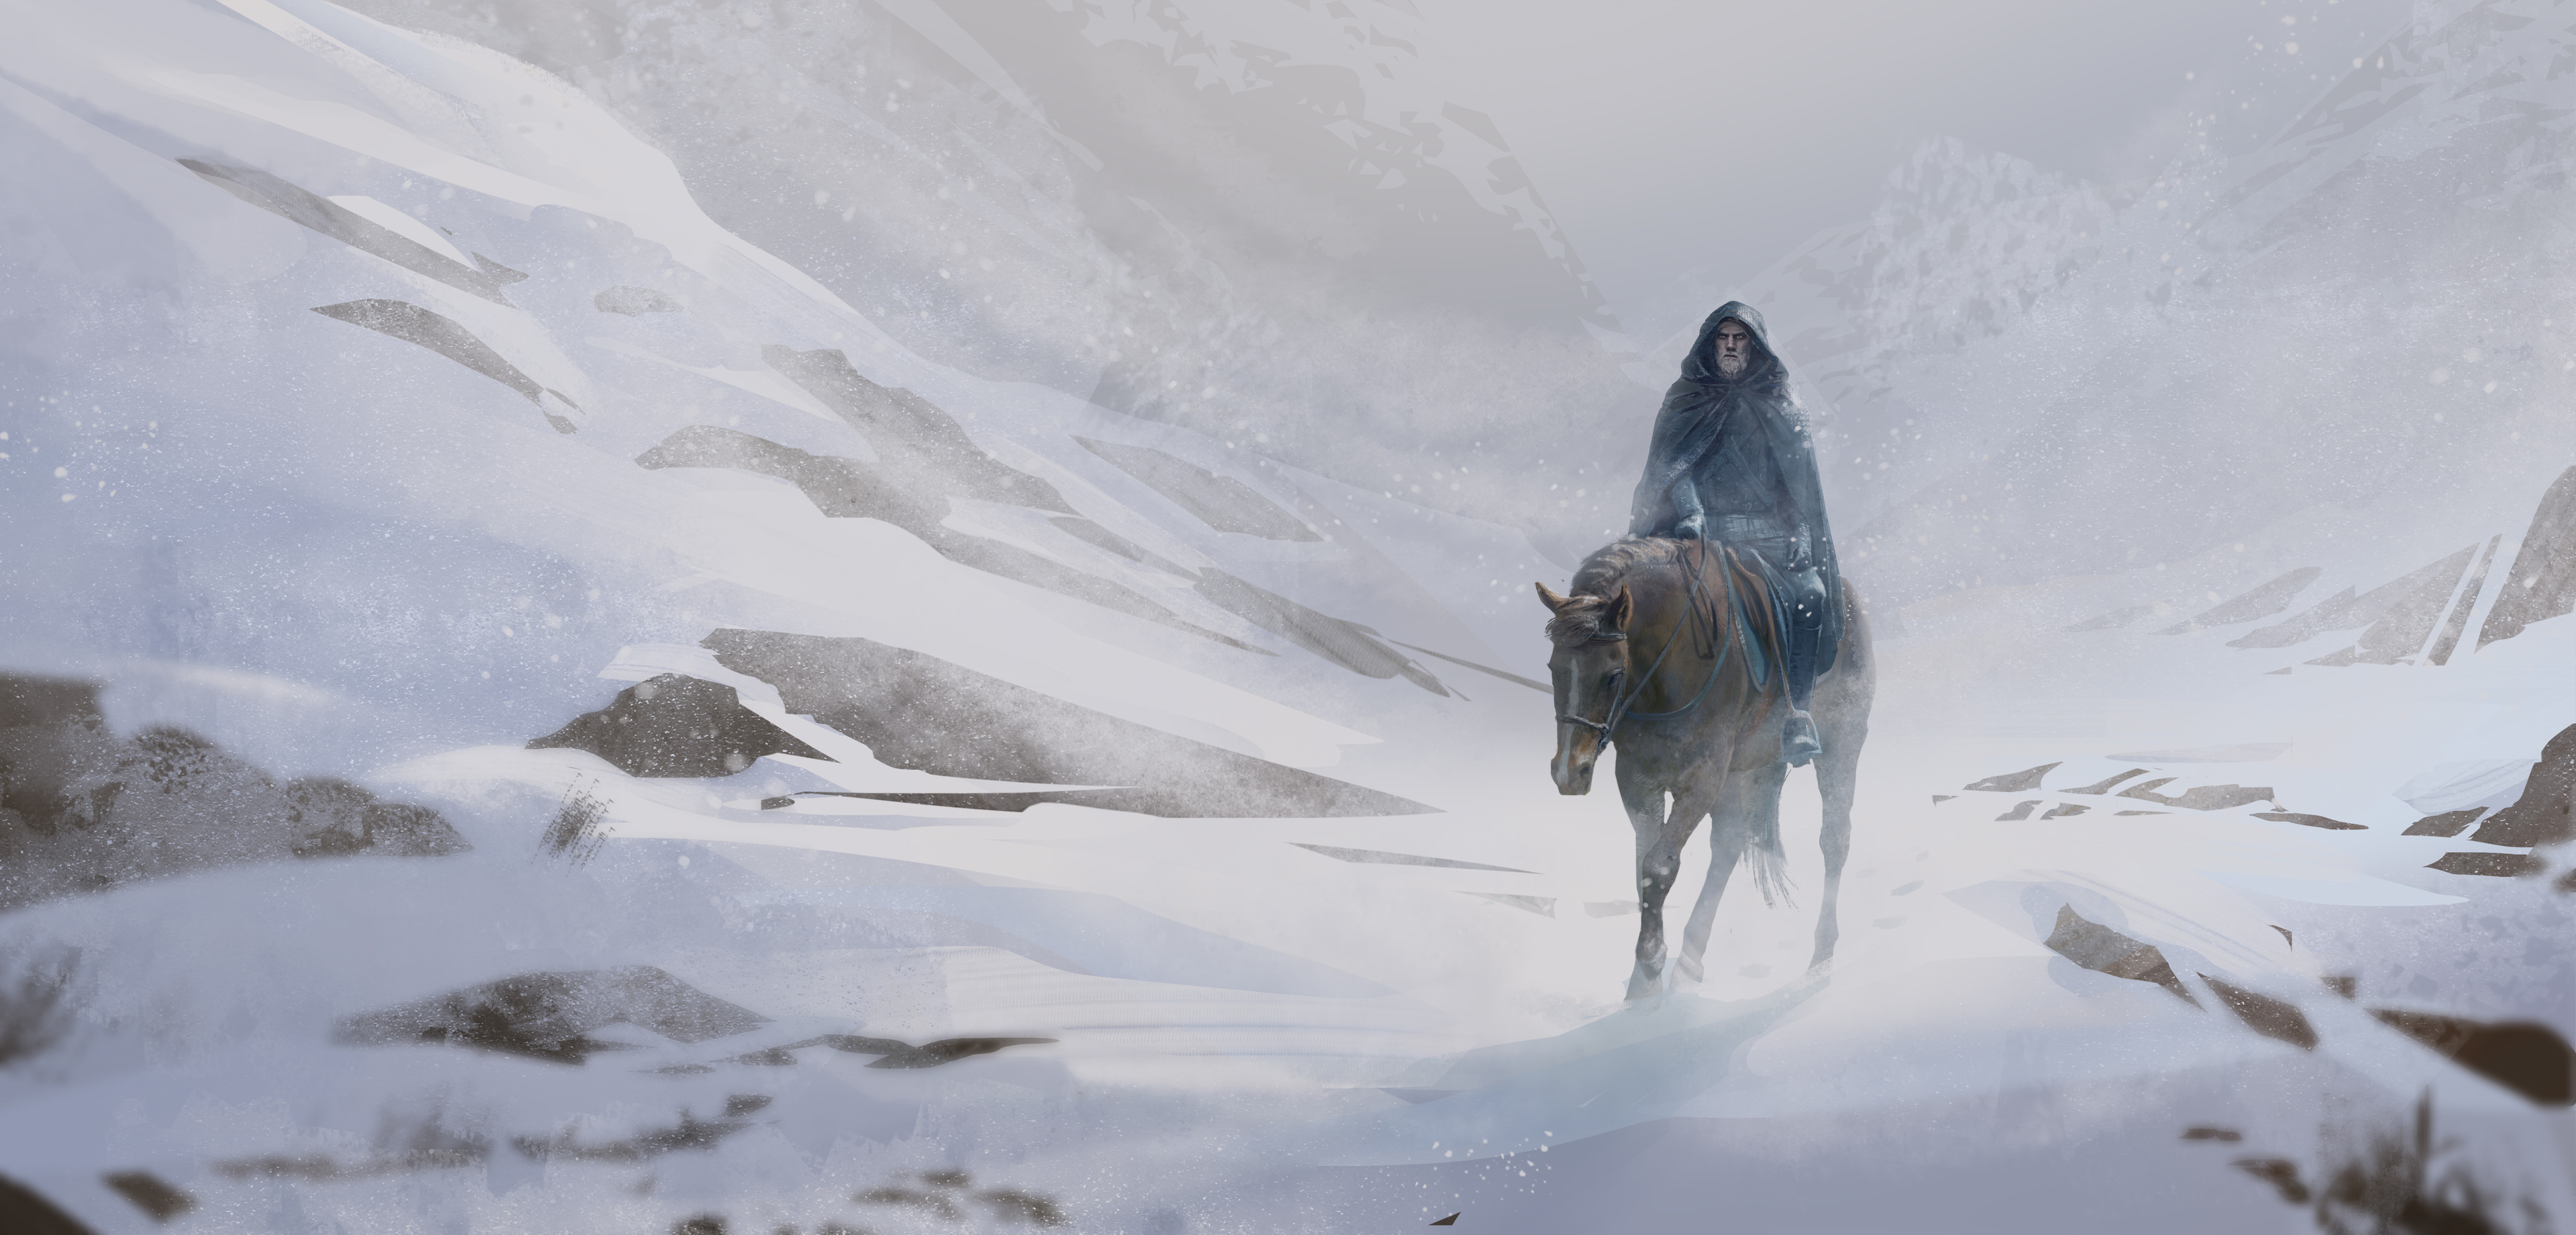 General 3840x1841 artwork digital art video game art video games The Witcher The Witcher 3: Wild Hunt snow horse Geralt of Rivia